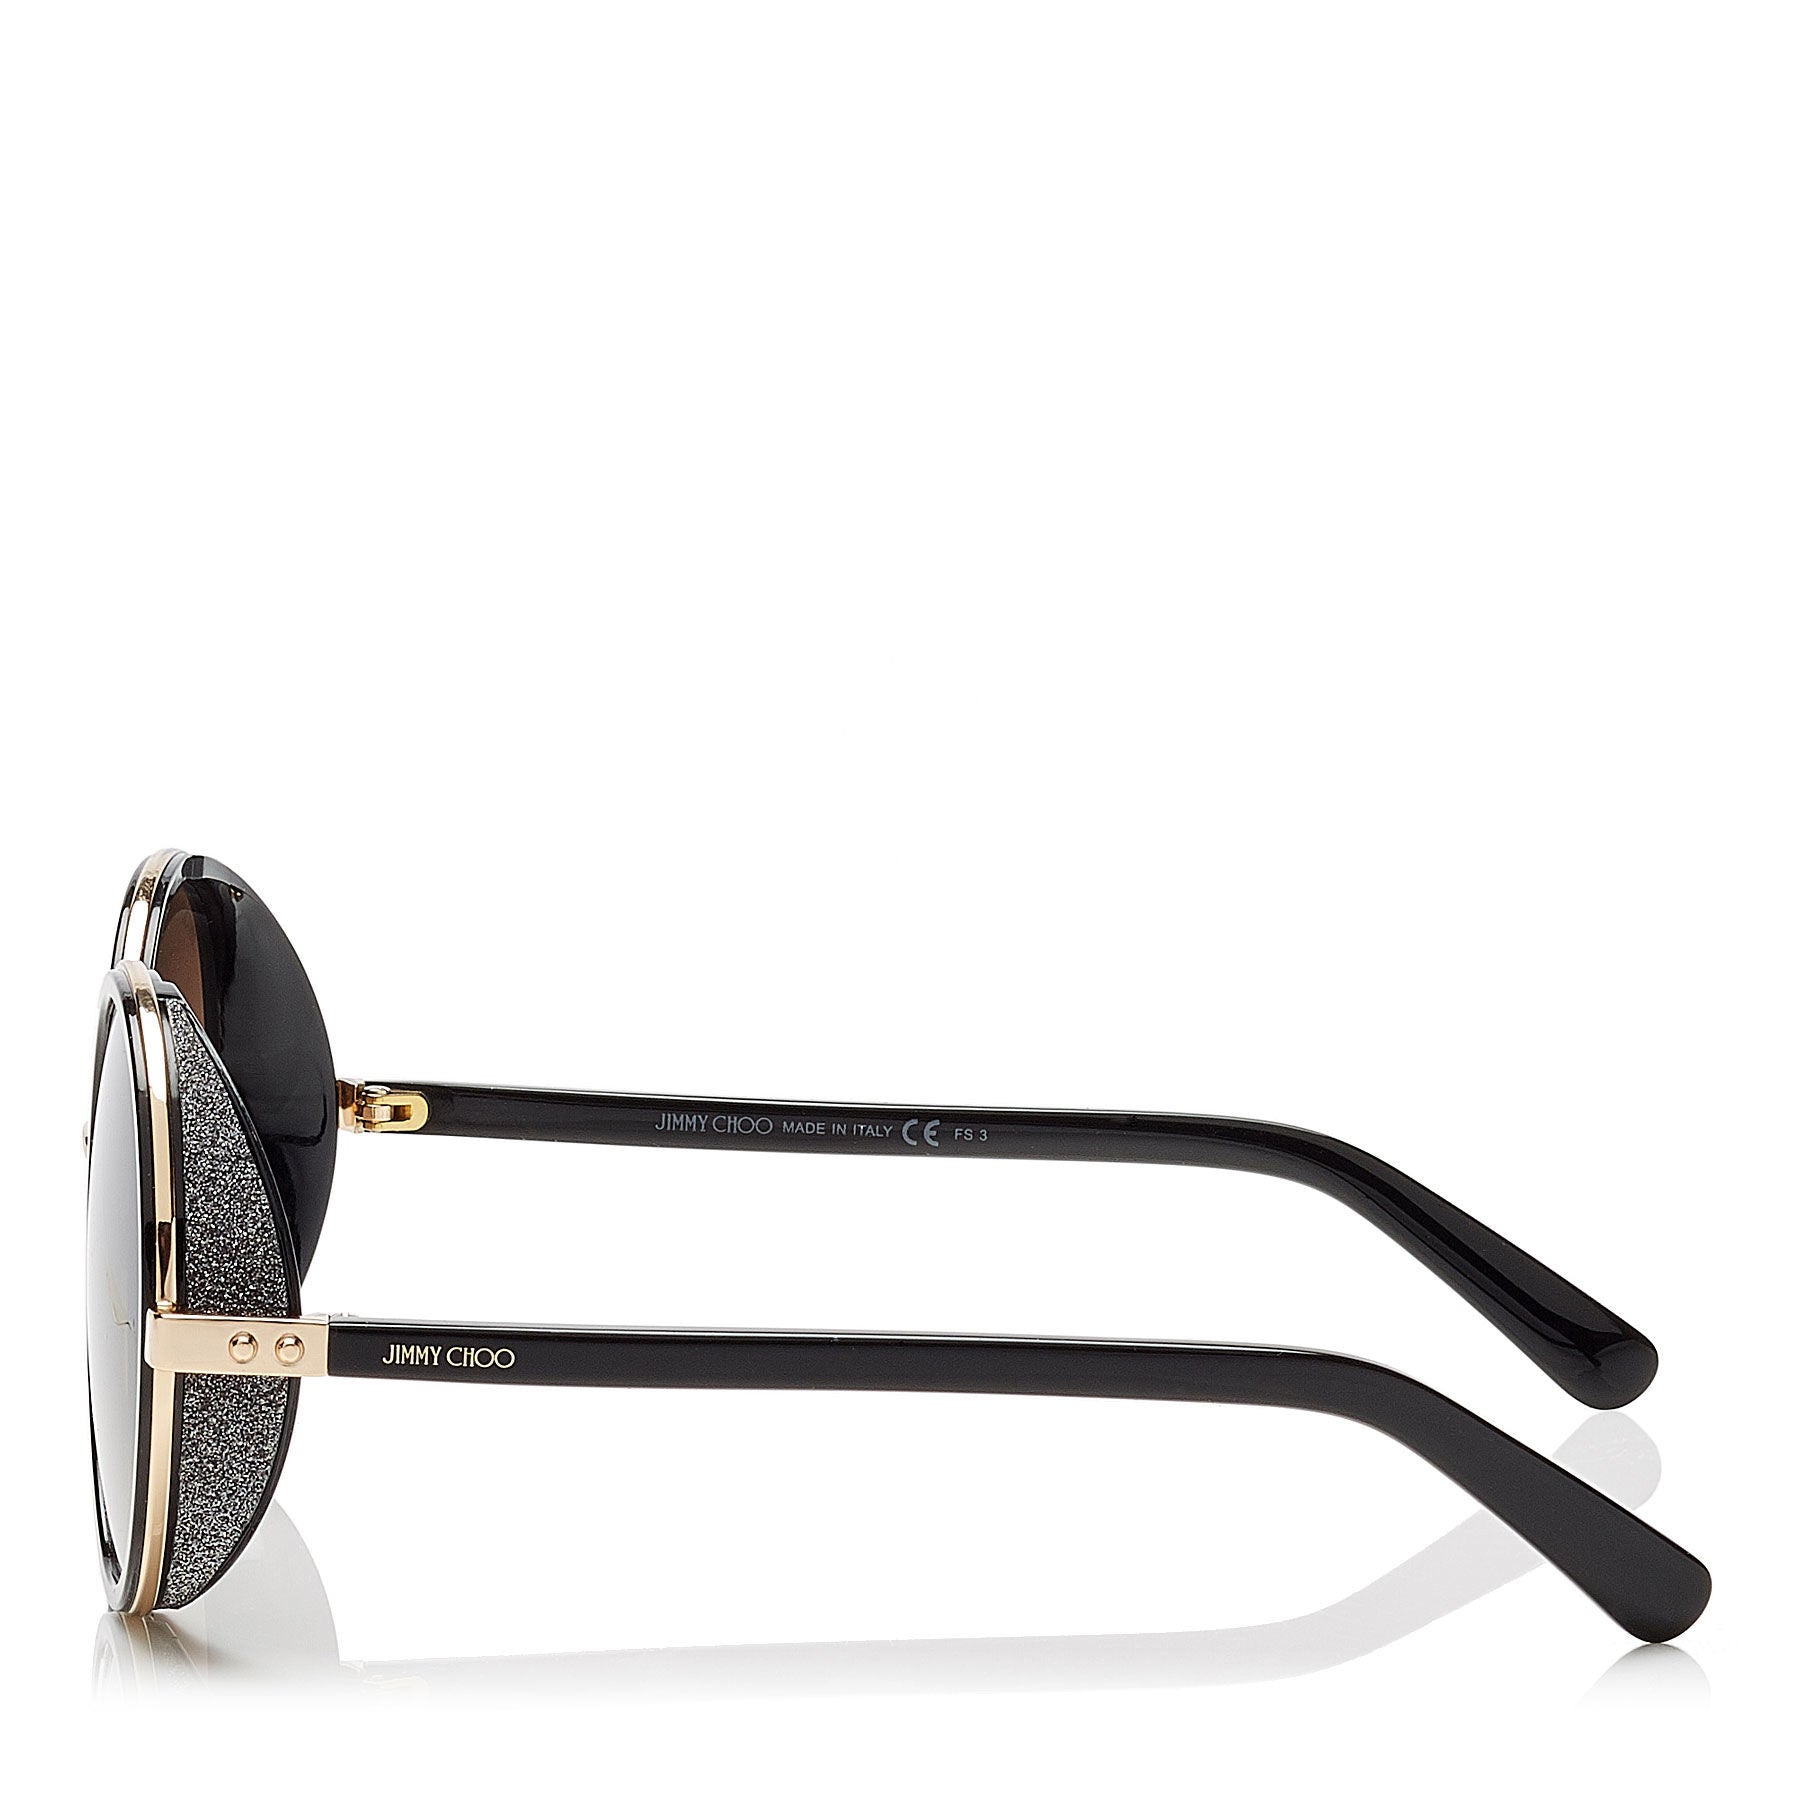 JIMMY CHOO Andie Rose Gold and Black Acetate Round Framed Sunglasses with Gold and Silver Fabric Detailing ITEM NO. ANDIES54EJ7Q